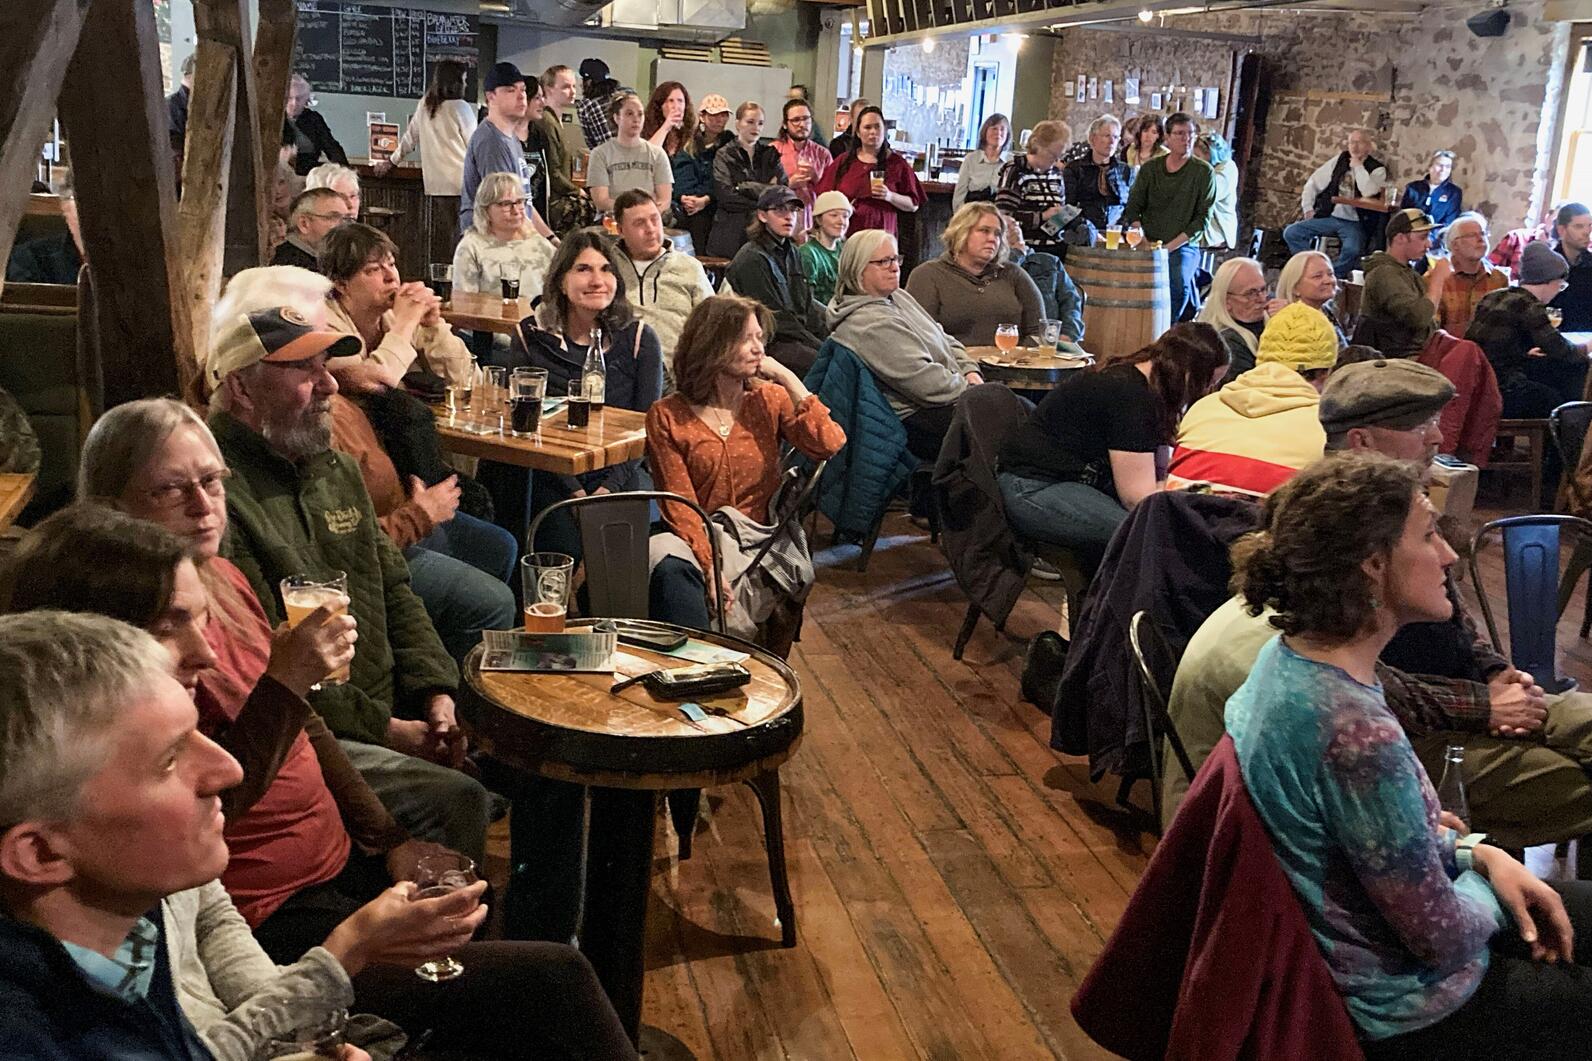 Over 130 people gathered at Ore Dock Brewery Co. in Marquette, MI to attend the MI Birds program.    